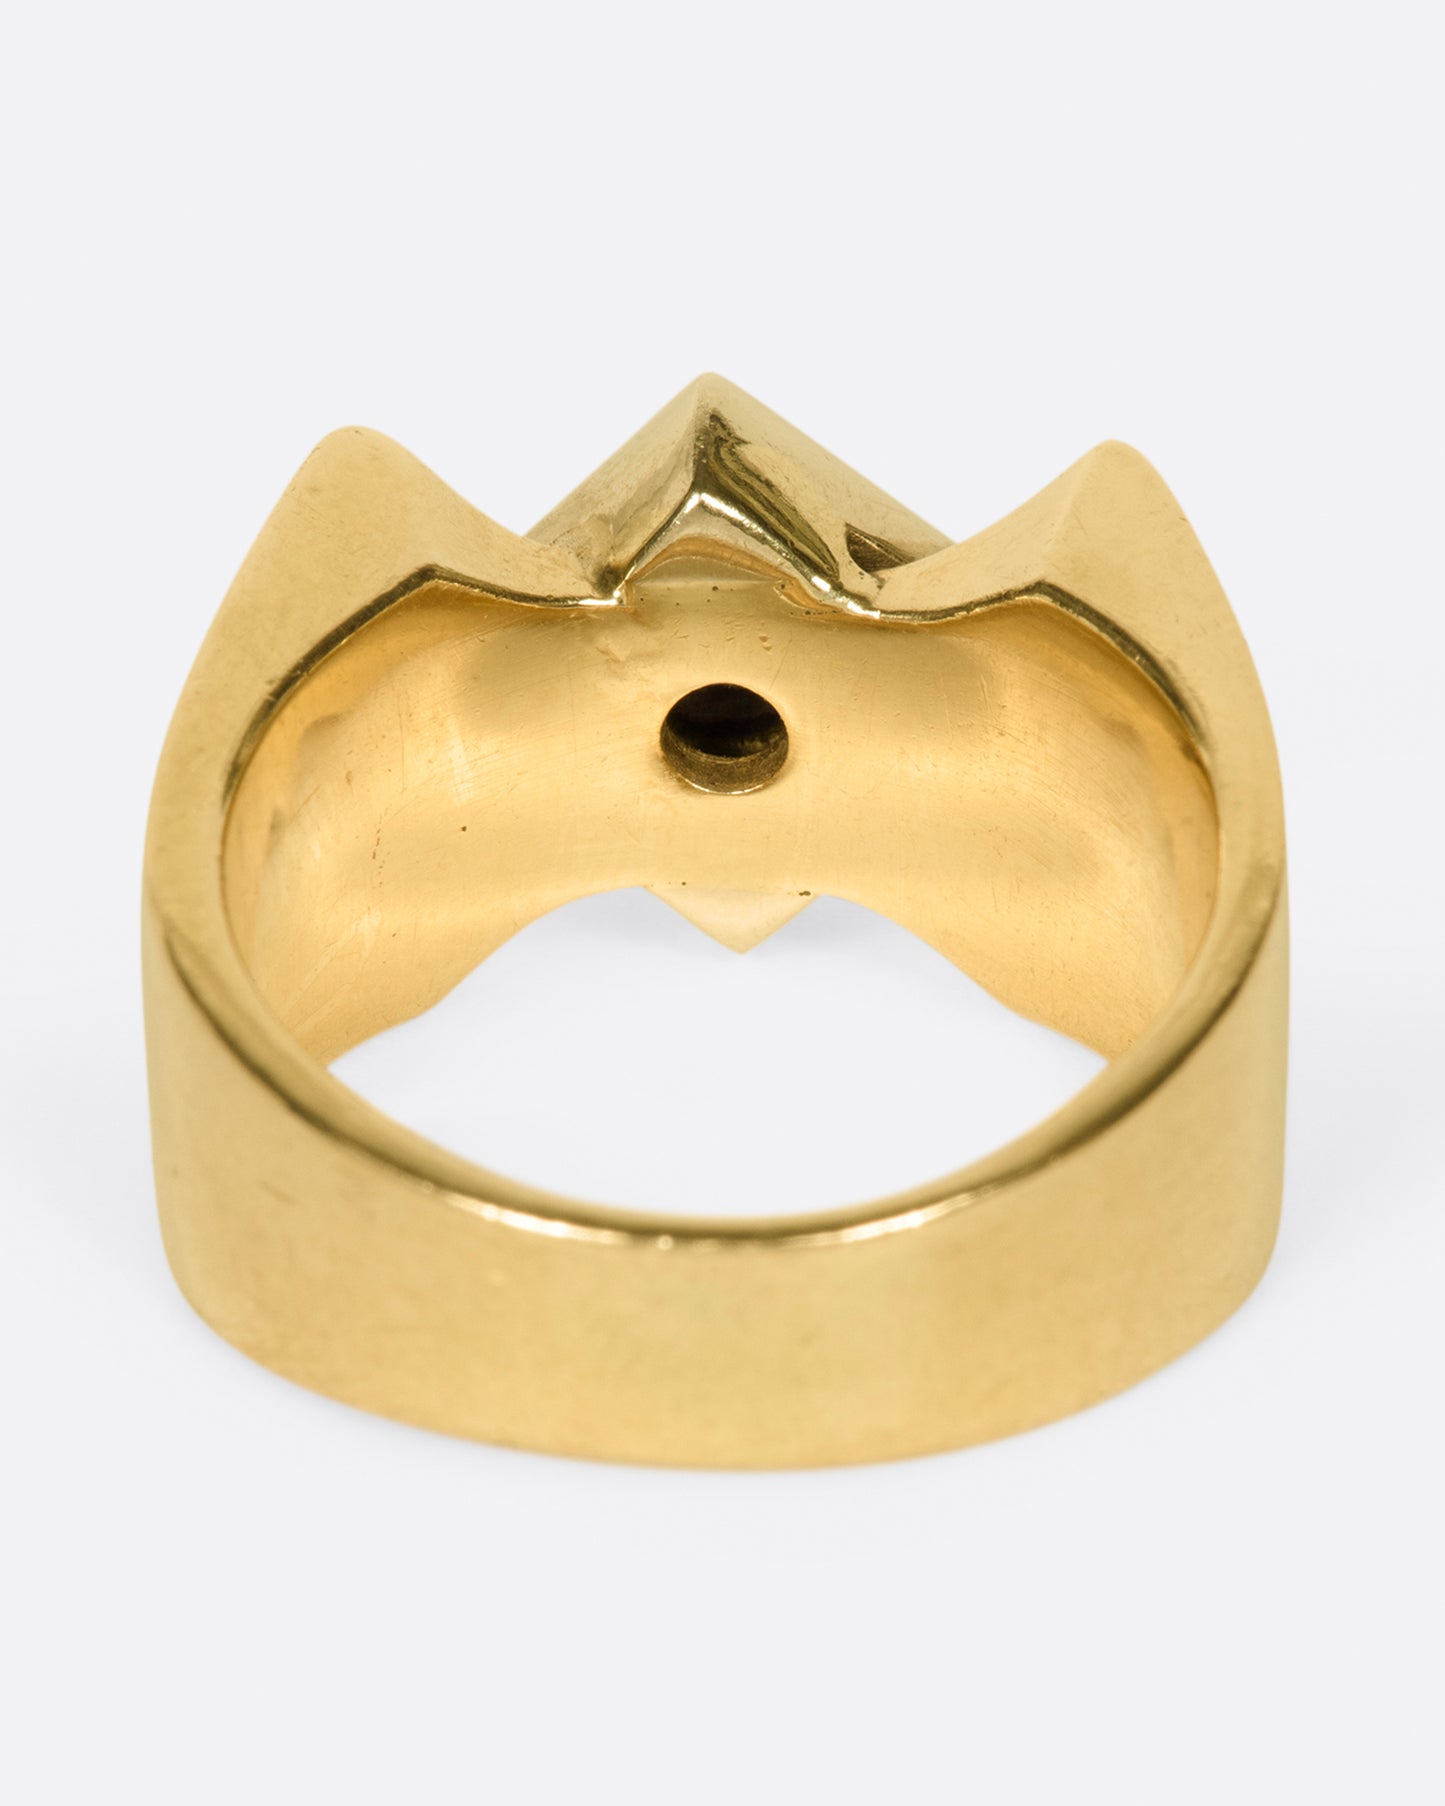 A heavy, gold, X-shaped ring with a white gold square and a round diamond at its center.